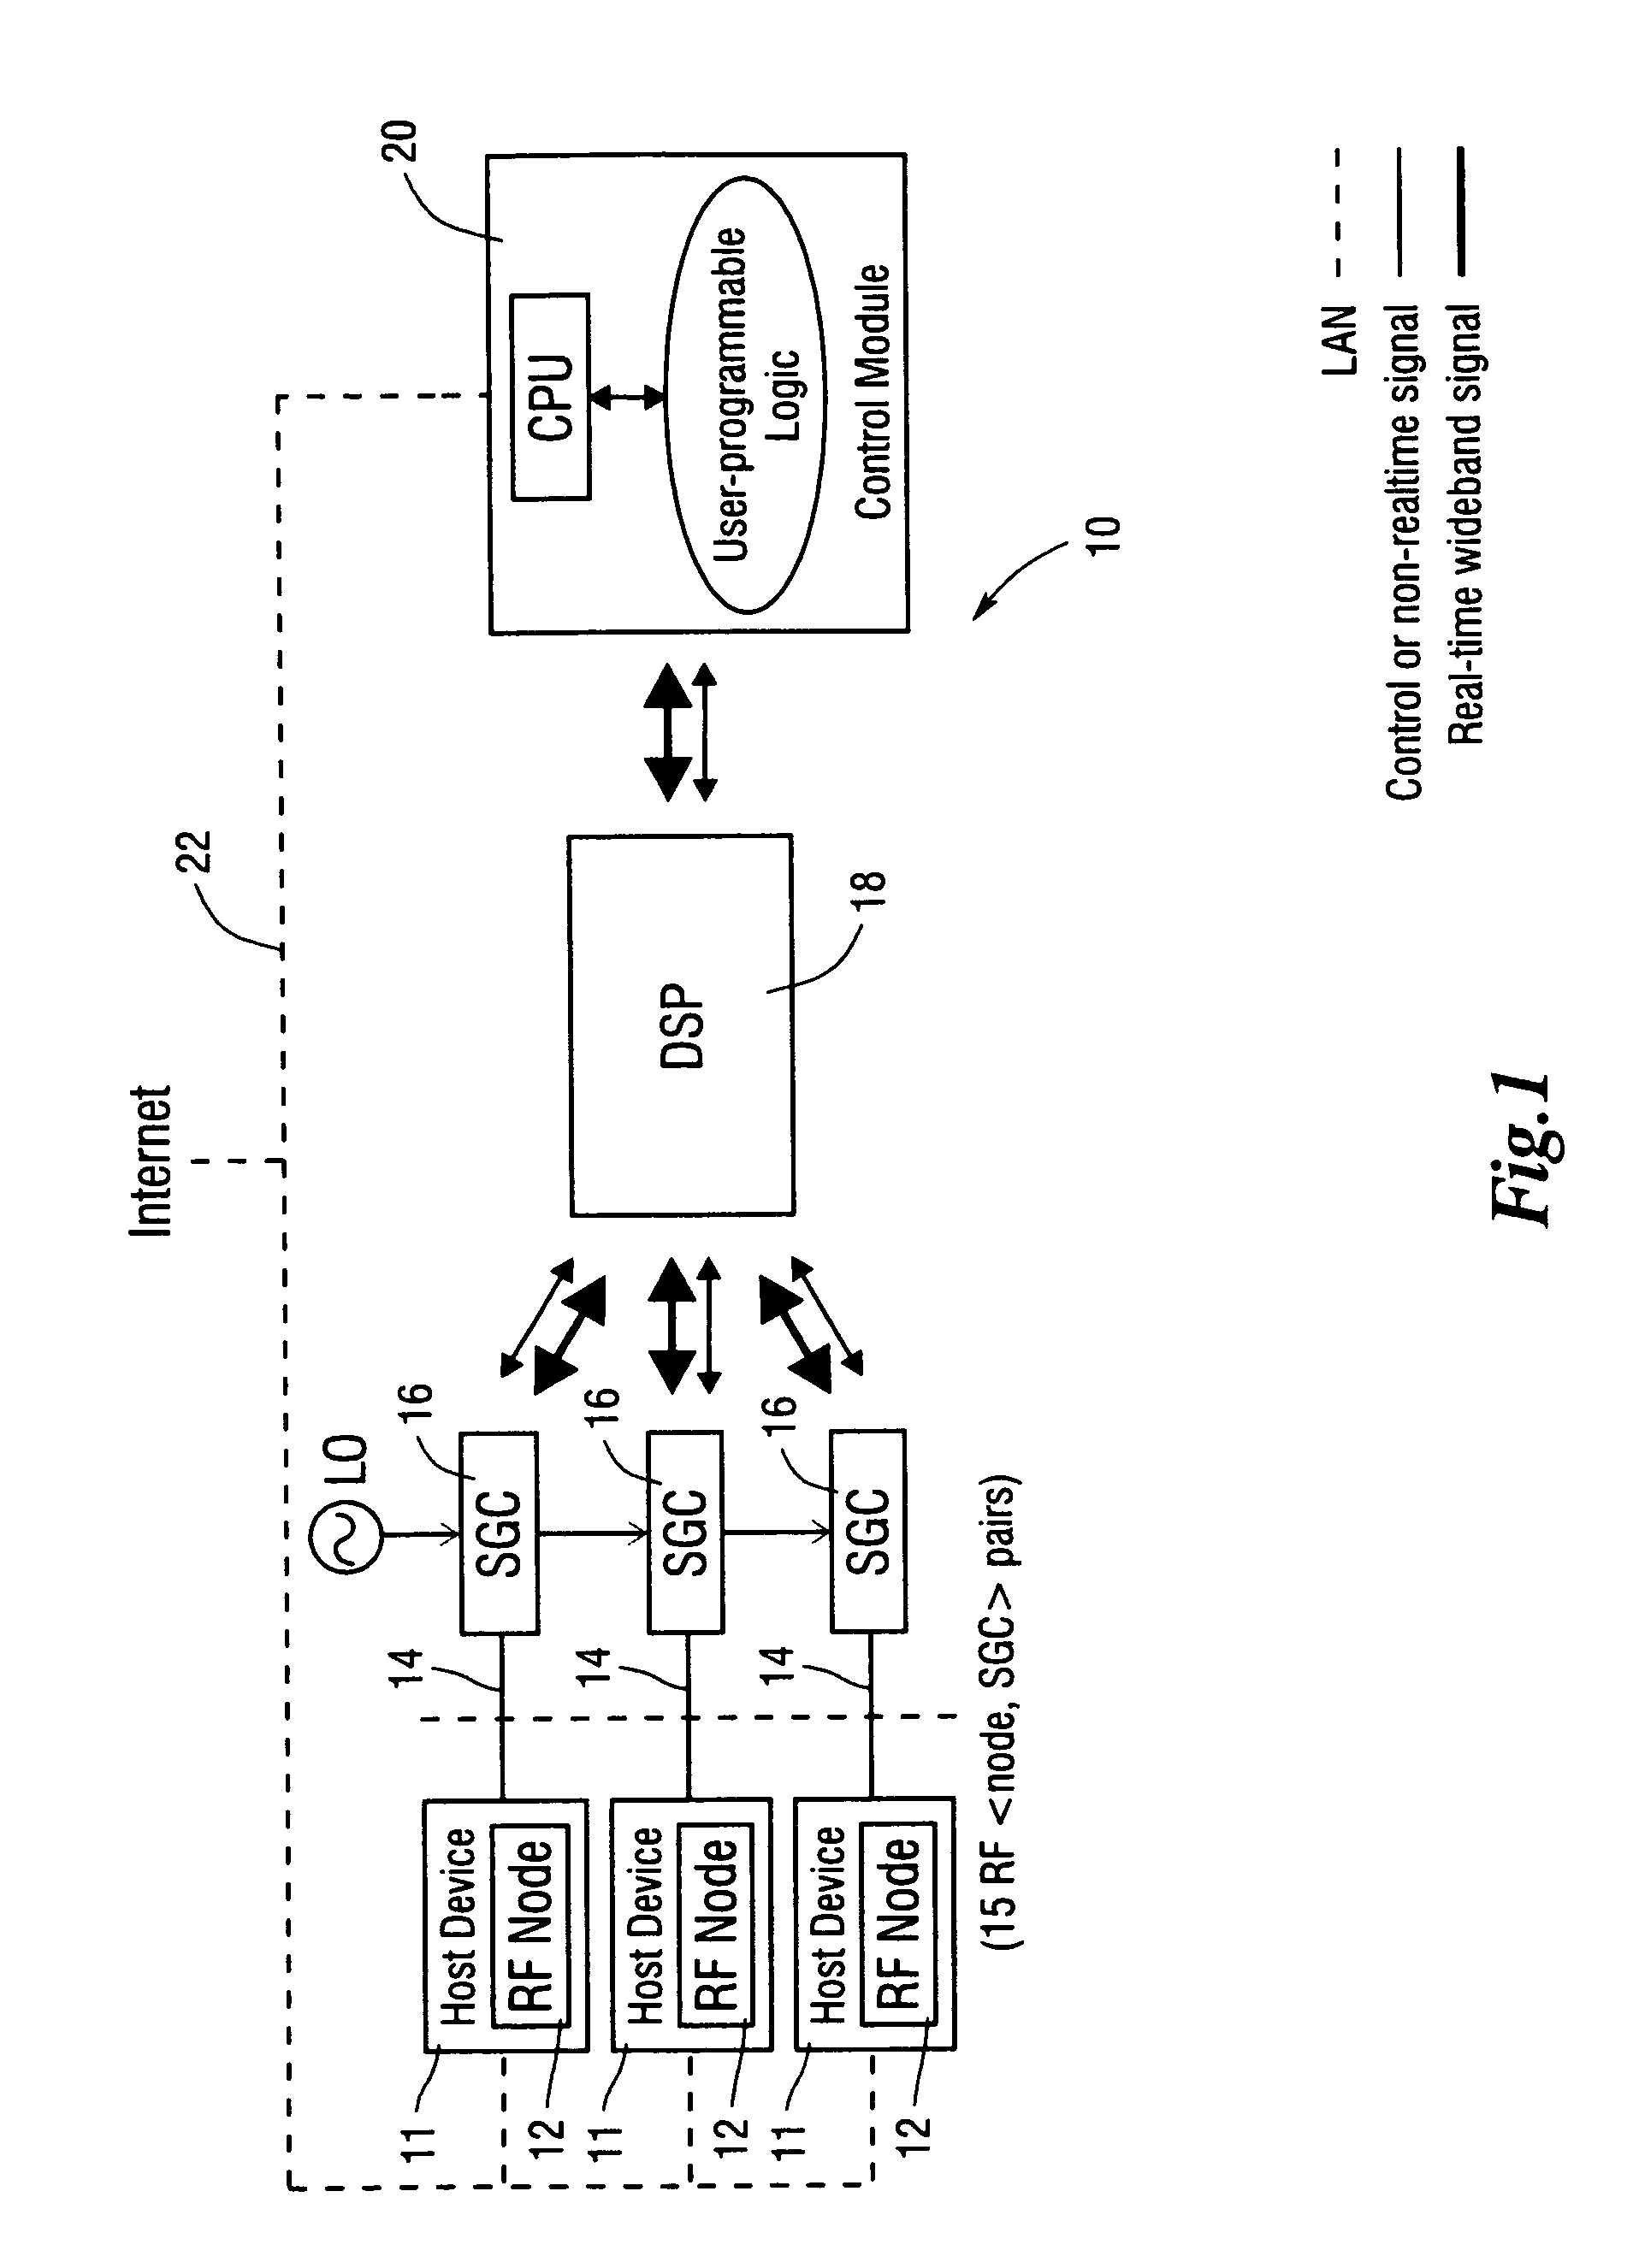 Device and method for programmable wideband network emulation